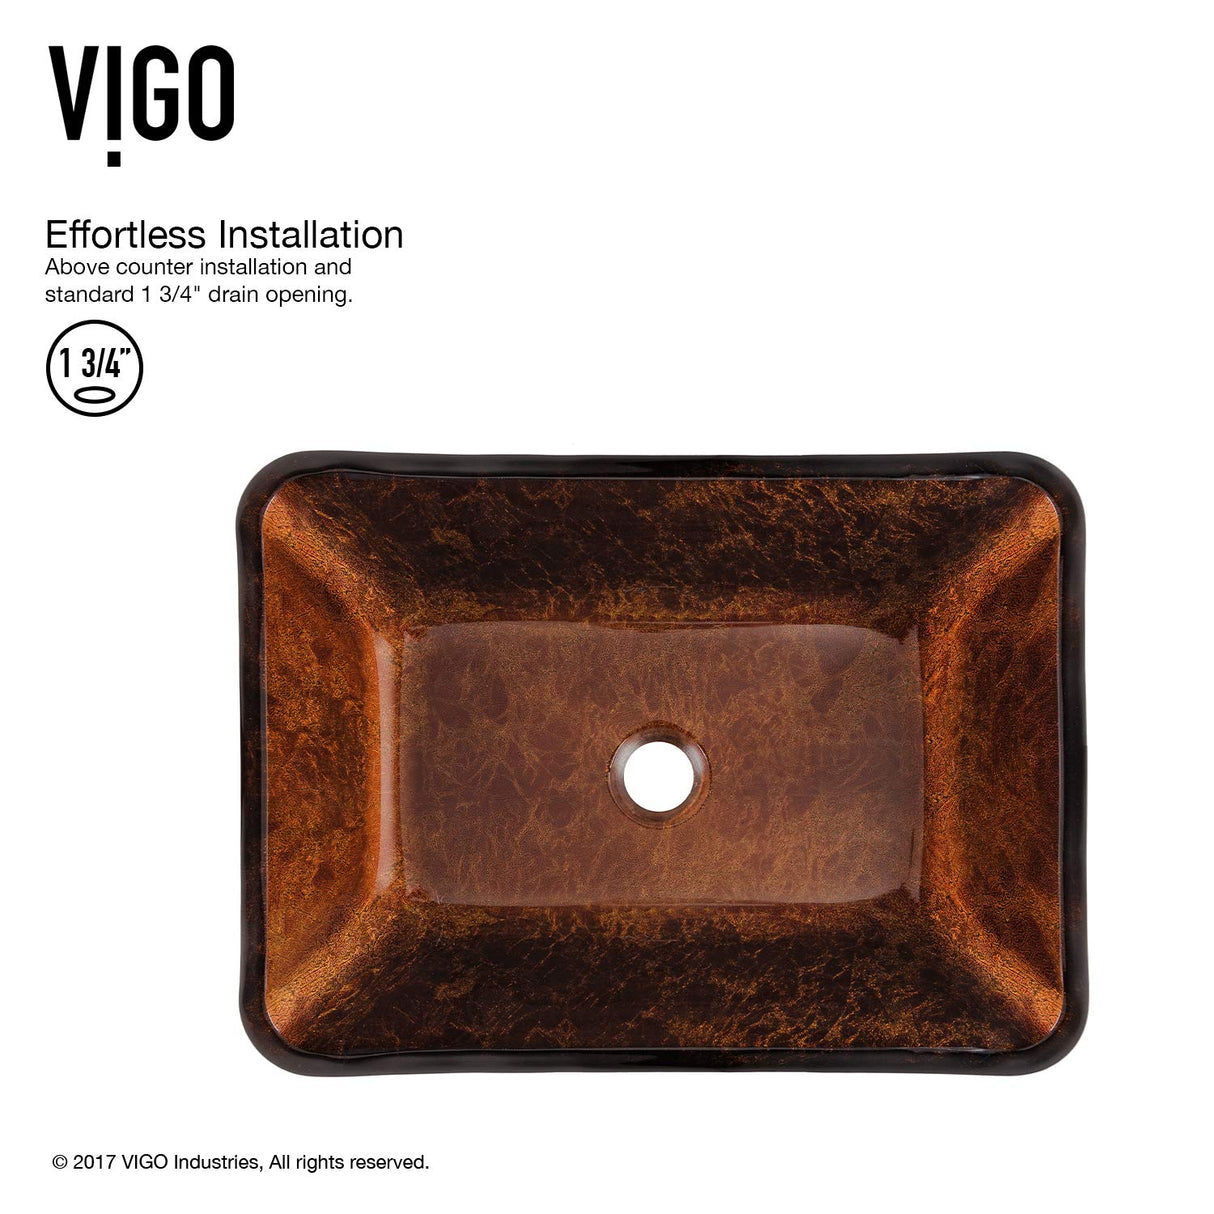 VIGO VGT1600 18.125" L -13.0" W -12.38" H Handmade Countertop Glass Rectangular Vessel Bathroom Sink Set in Red and Brown Fusion Finish with Antique Rubbed Bronze Single-Handle Faucet and Pop Up Drain